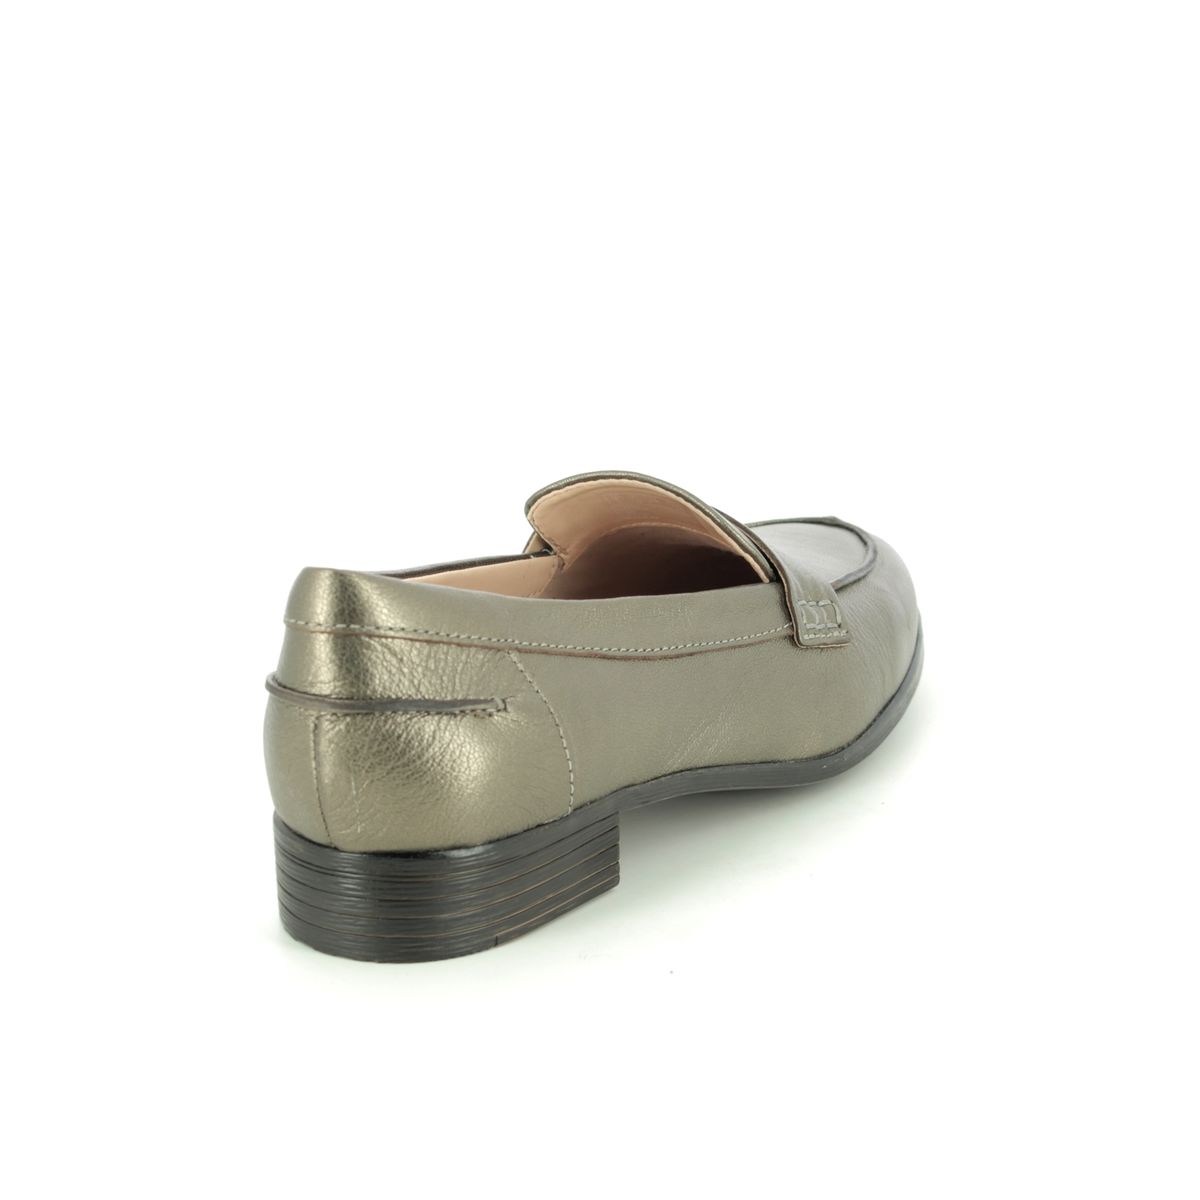 clarks gold loafers